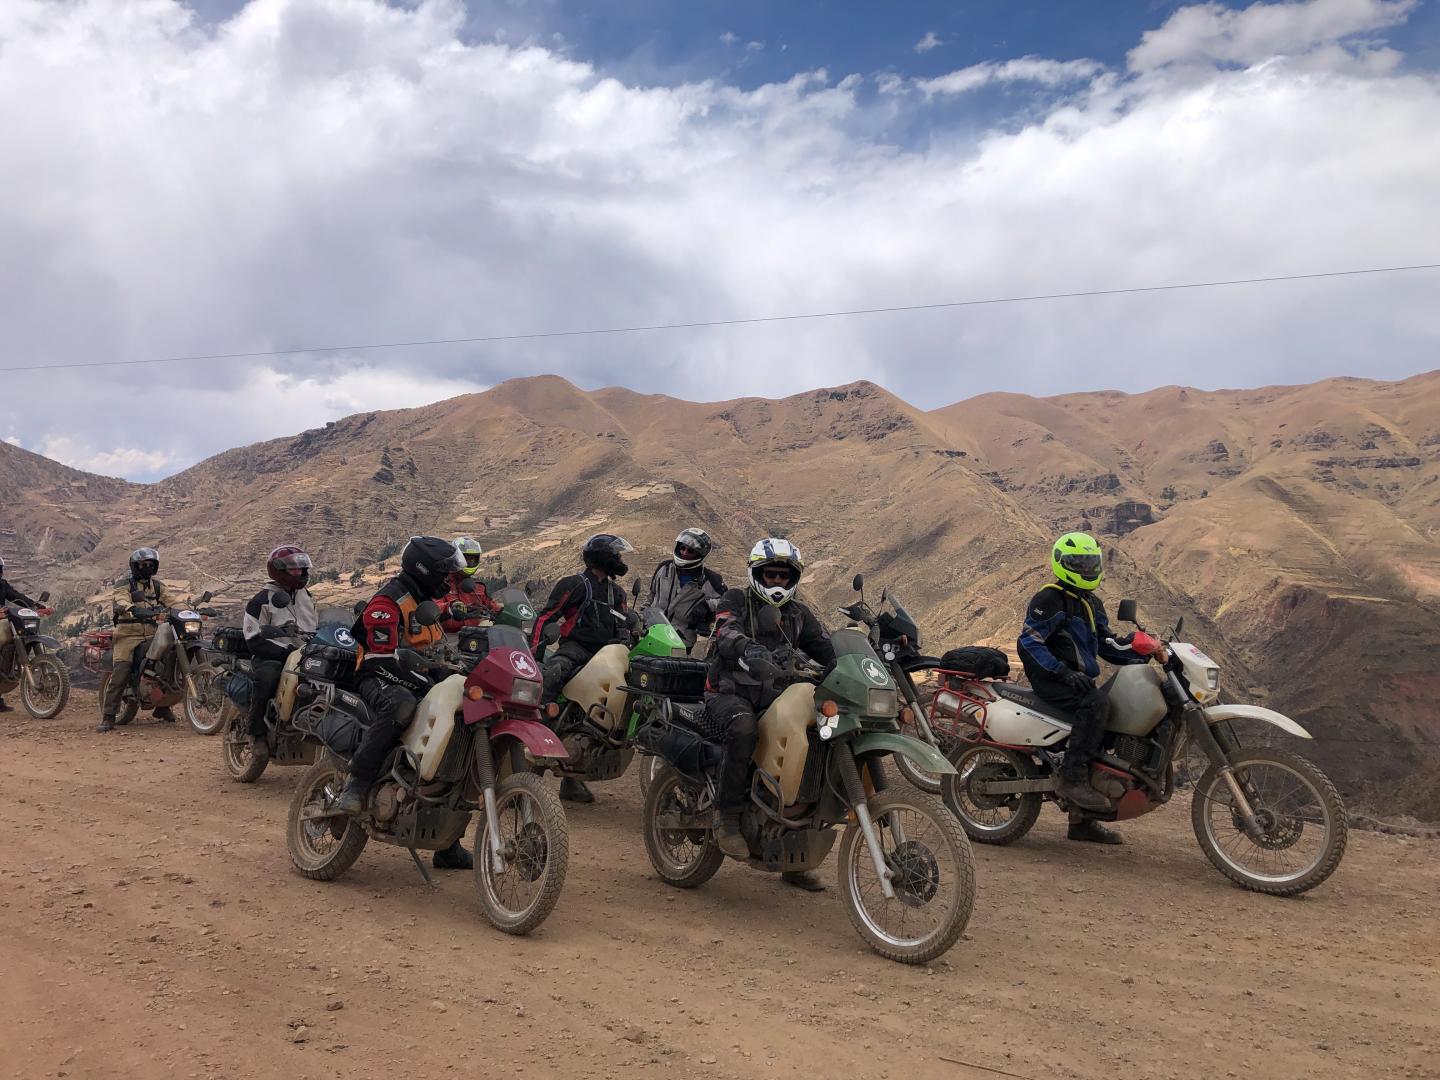 A large group of people on motorcycles in the mountains of Bolivia